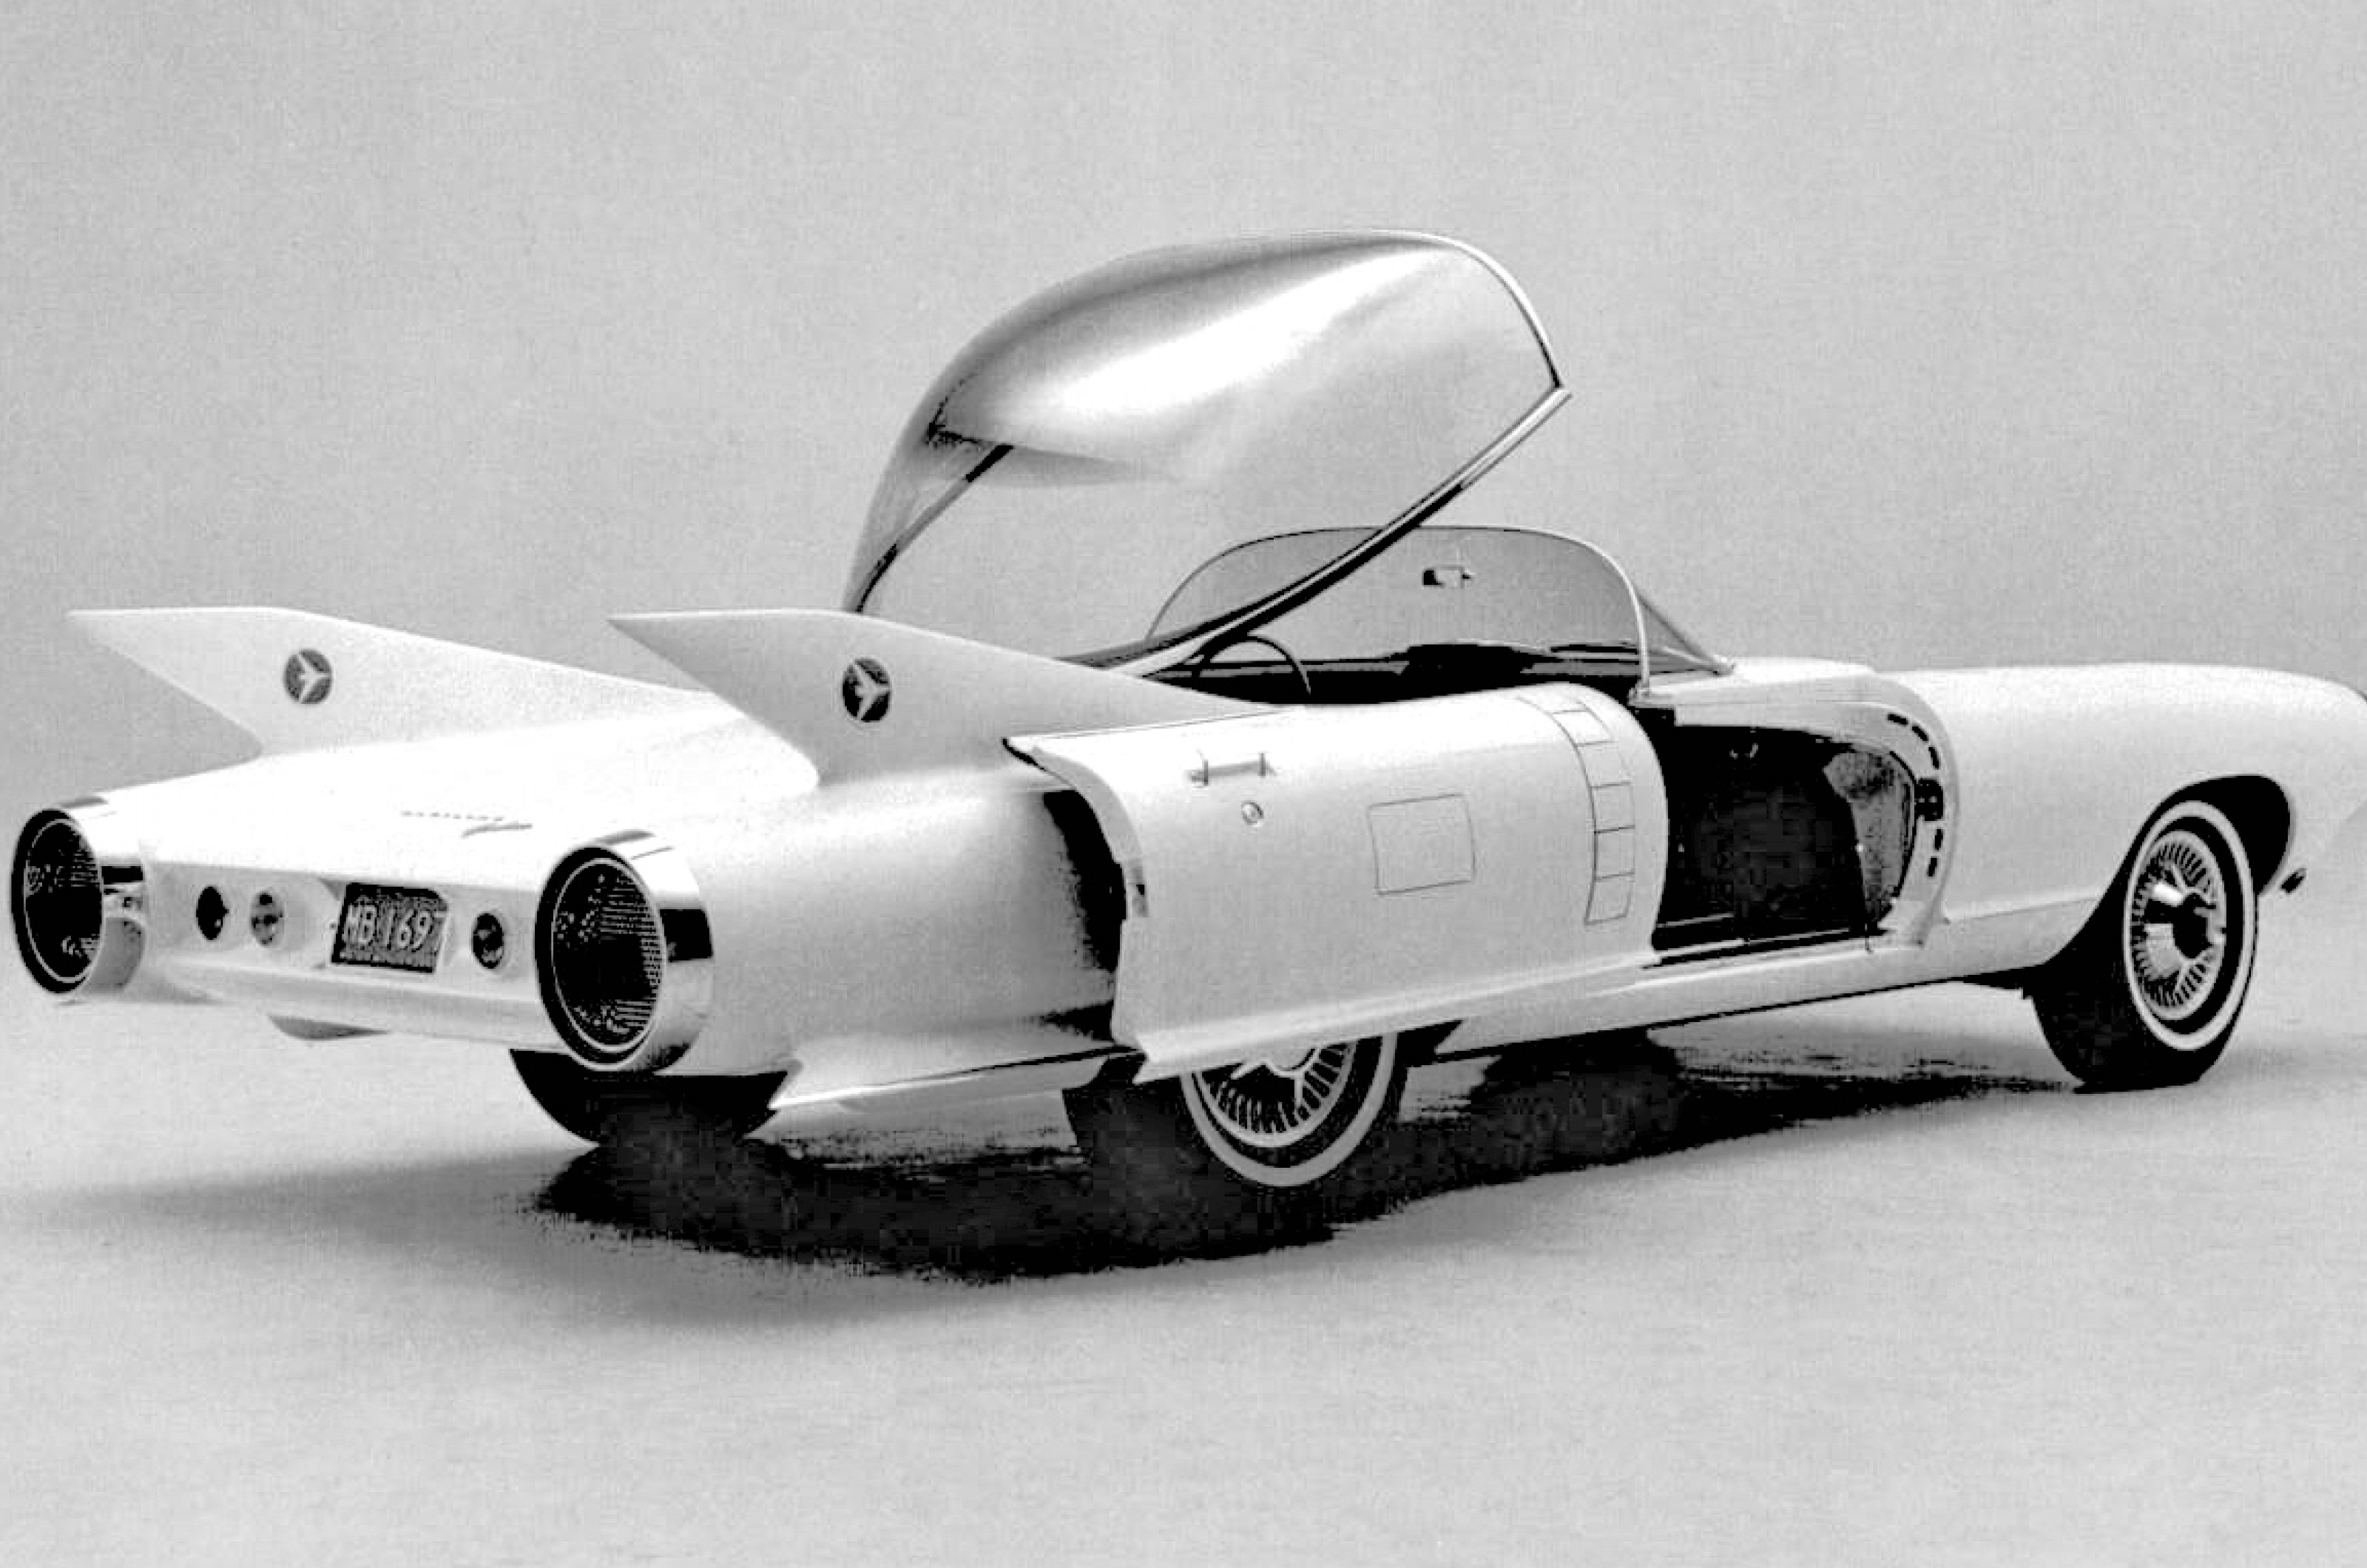 <p>The space race had a significant influence on car design in the late 1950s and the Cyclone was clearly no exception.</p>  <p>The glass roof’s purpose was twofold: when the motorized sliding doors opened, the roof automatically lifted to give occupants ample headroom to get out, but it was also a cabriolet roof.</p>  <p>The bubble folded into the trunk when it wasn’t in use, leaving a curved windshield, and it closed automatically when the rain-detecting sensors recognized wet weather.</p>  <p>The side doors ran on ball bearings to make the motion as smooth as possible and they opened at the touch of a button.</p>  <p>To avoid cooking its passengers, the Cyclone’s roof was coated with vaporized silver on the inside to protect against UV rays. All very space age.</p>